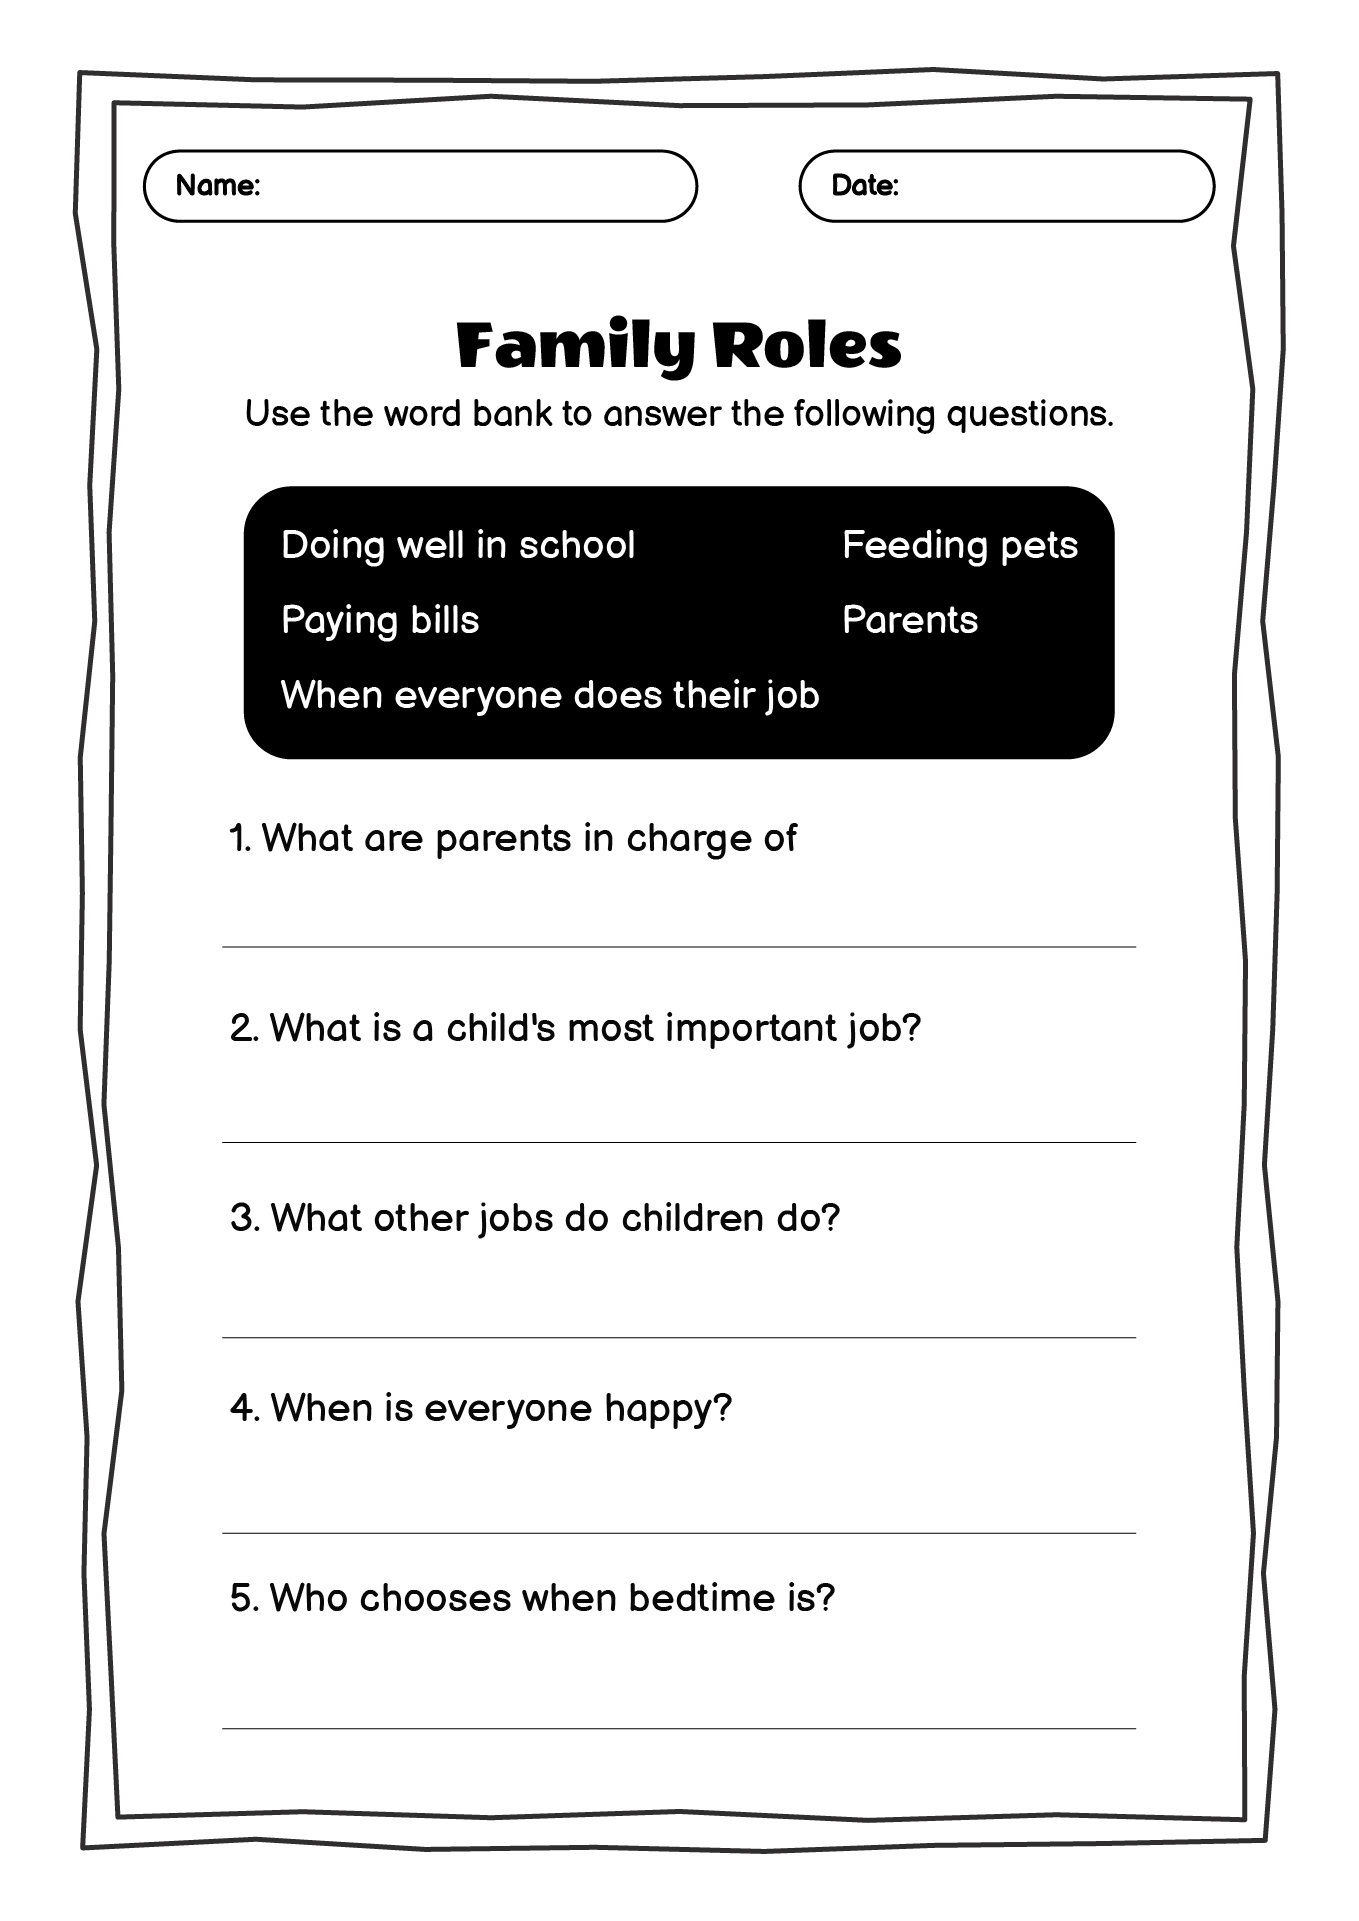 Dysfunctional Family Roles Chart Image